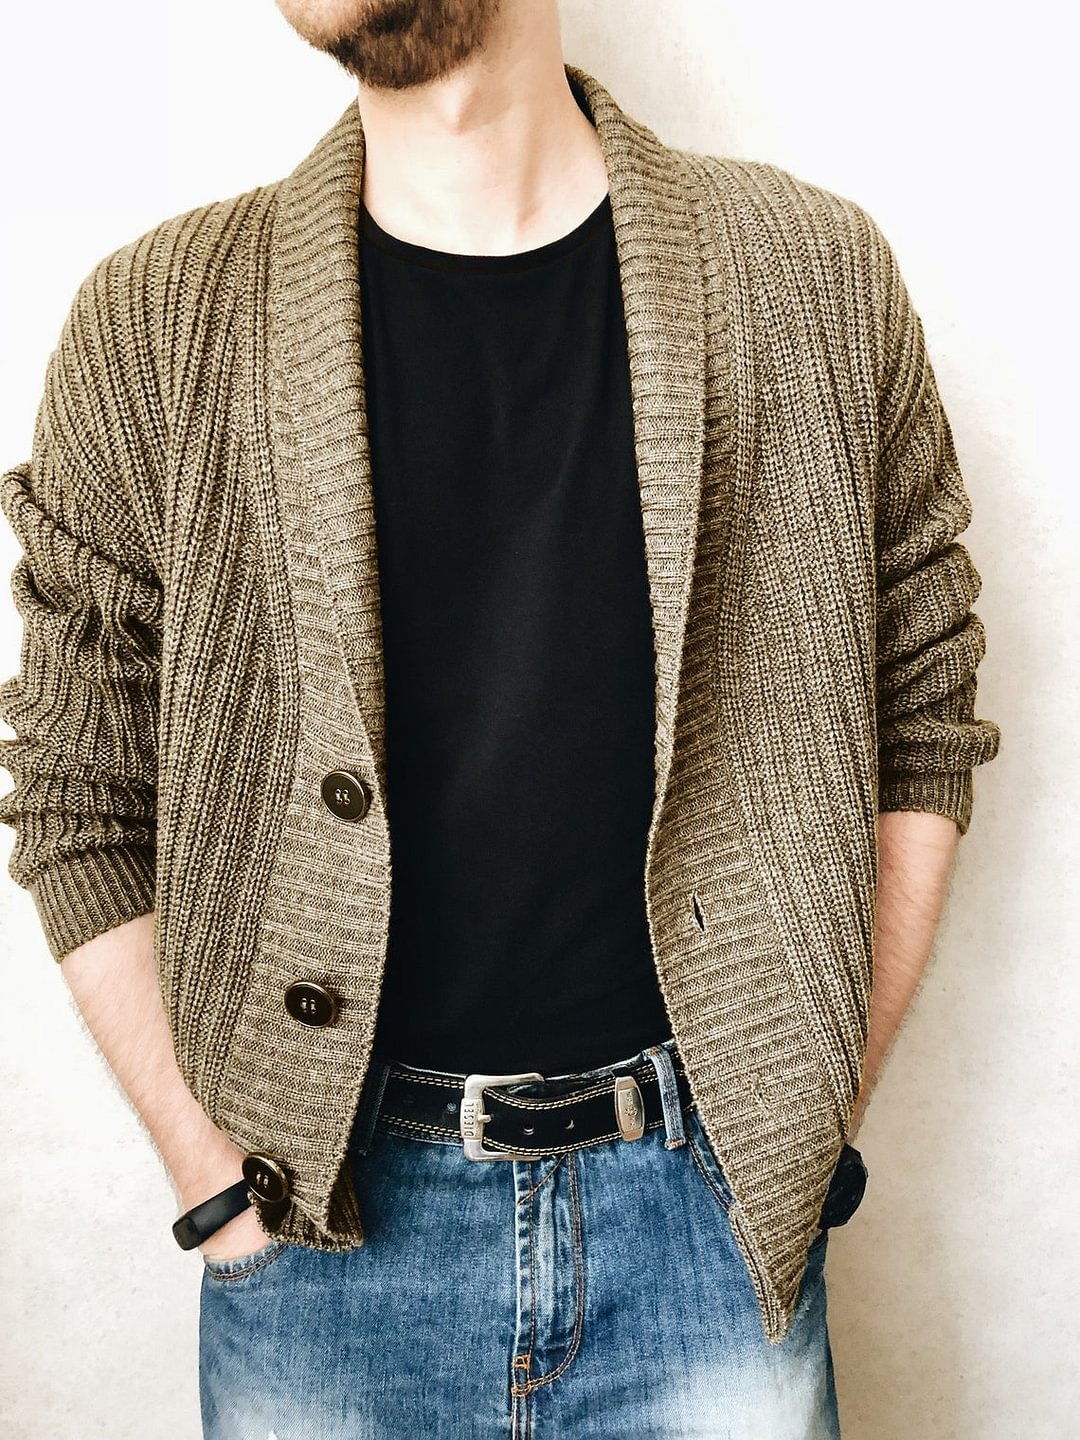 Single Breasted Casual Sweater Knitted Men's